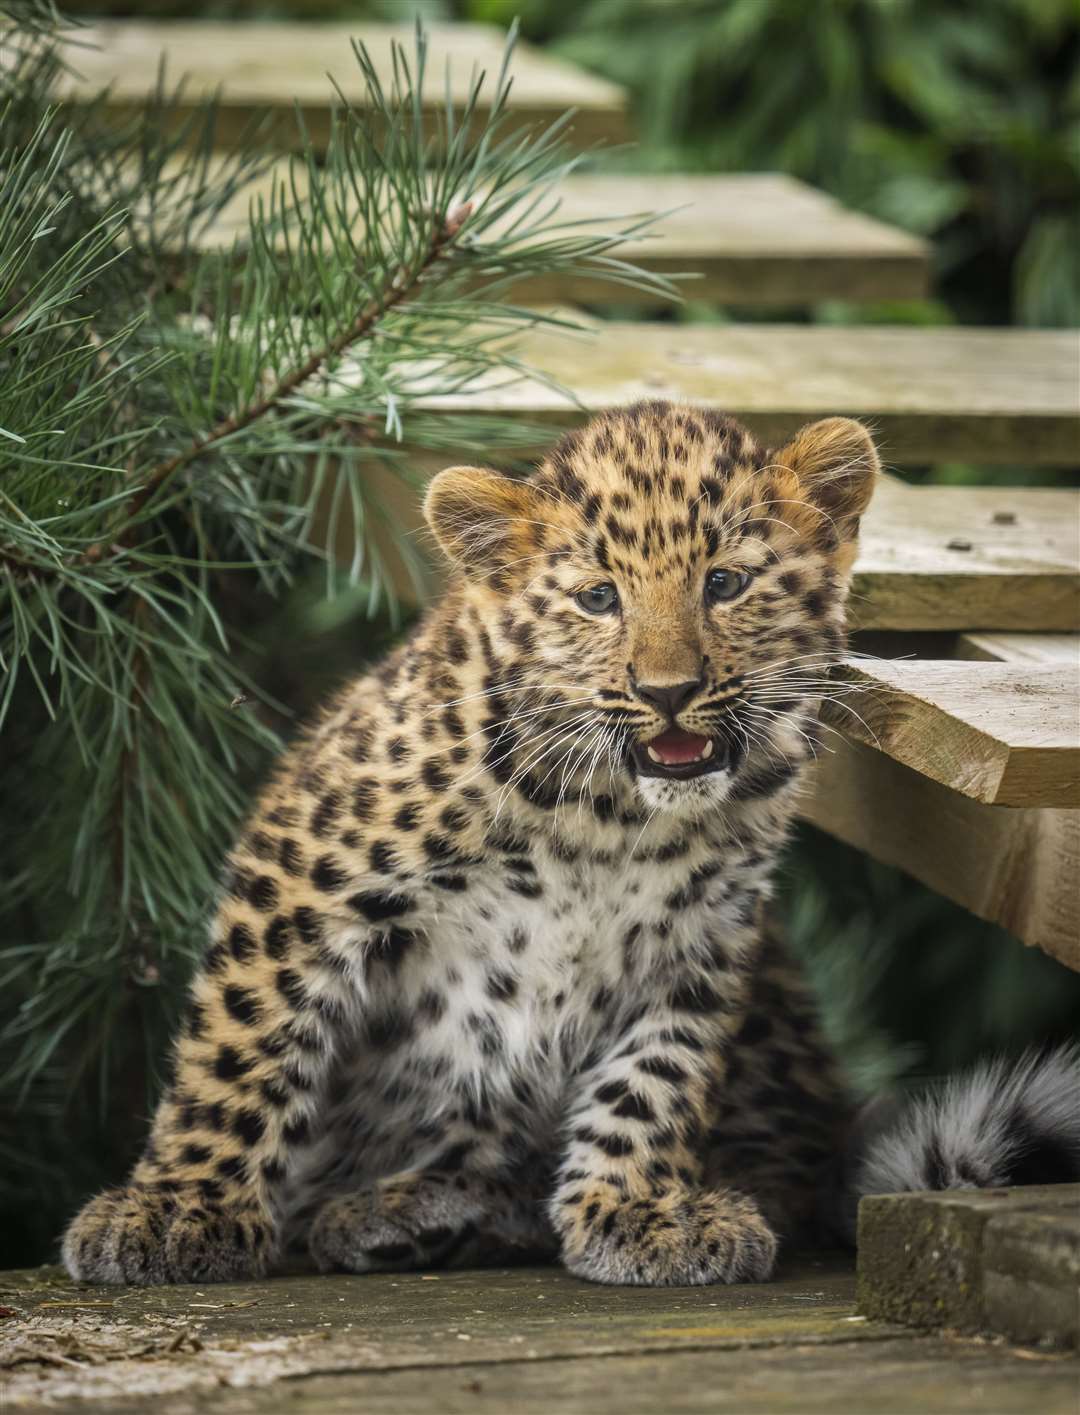 The Amur leopard cub weighs around two to three kilograms and is doing well (Danny Lawson/PA)